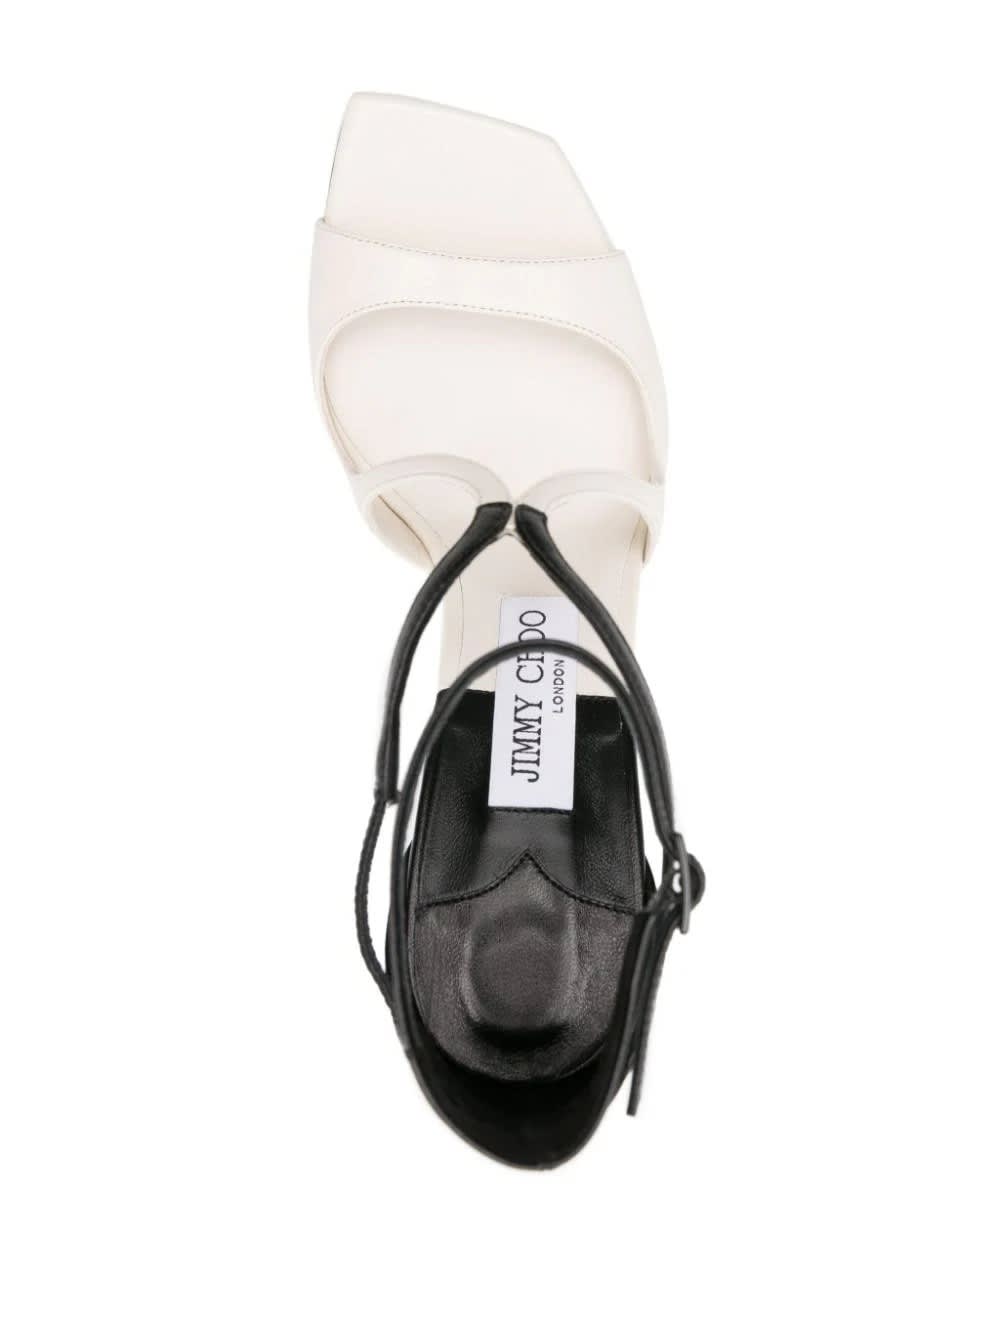 Shop Jimmy Choo Azia Sandals In Black And White Milk Patchwork Nappa Leather In Multicolour